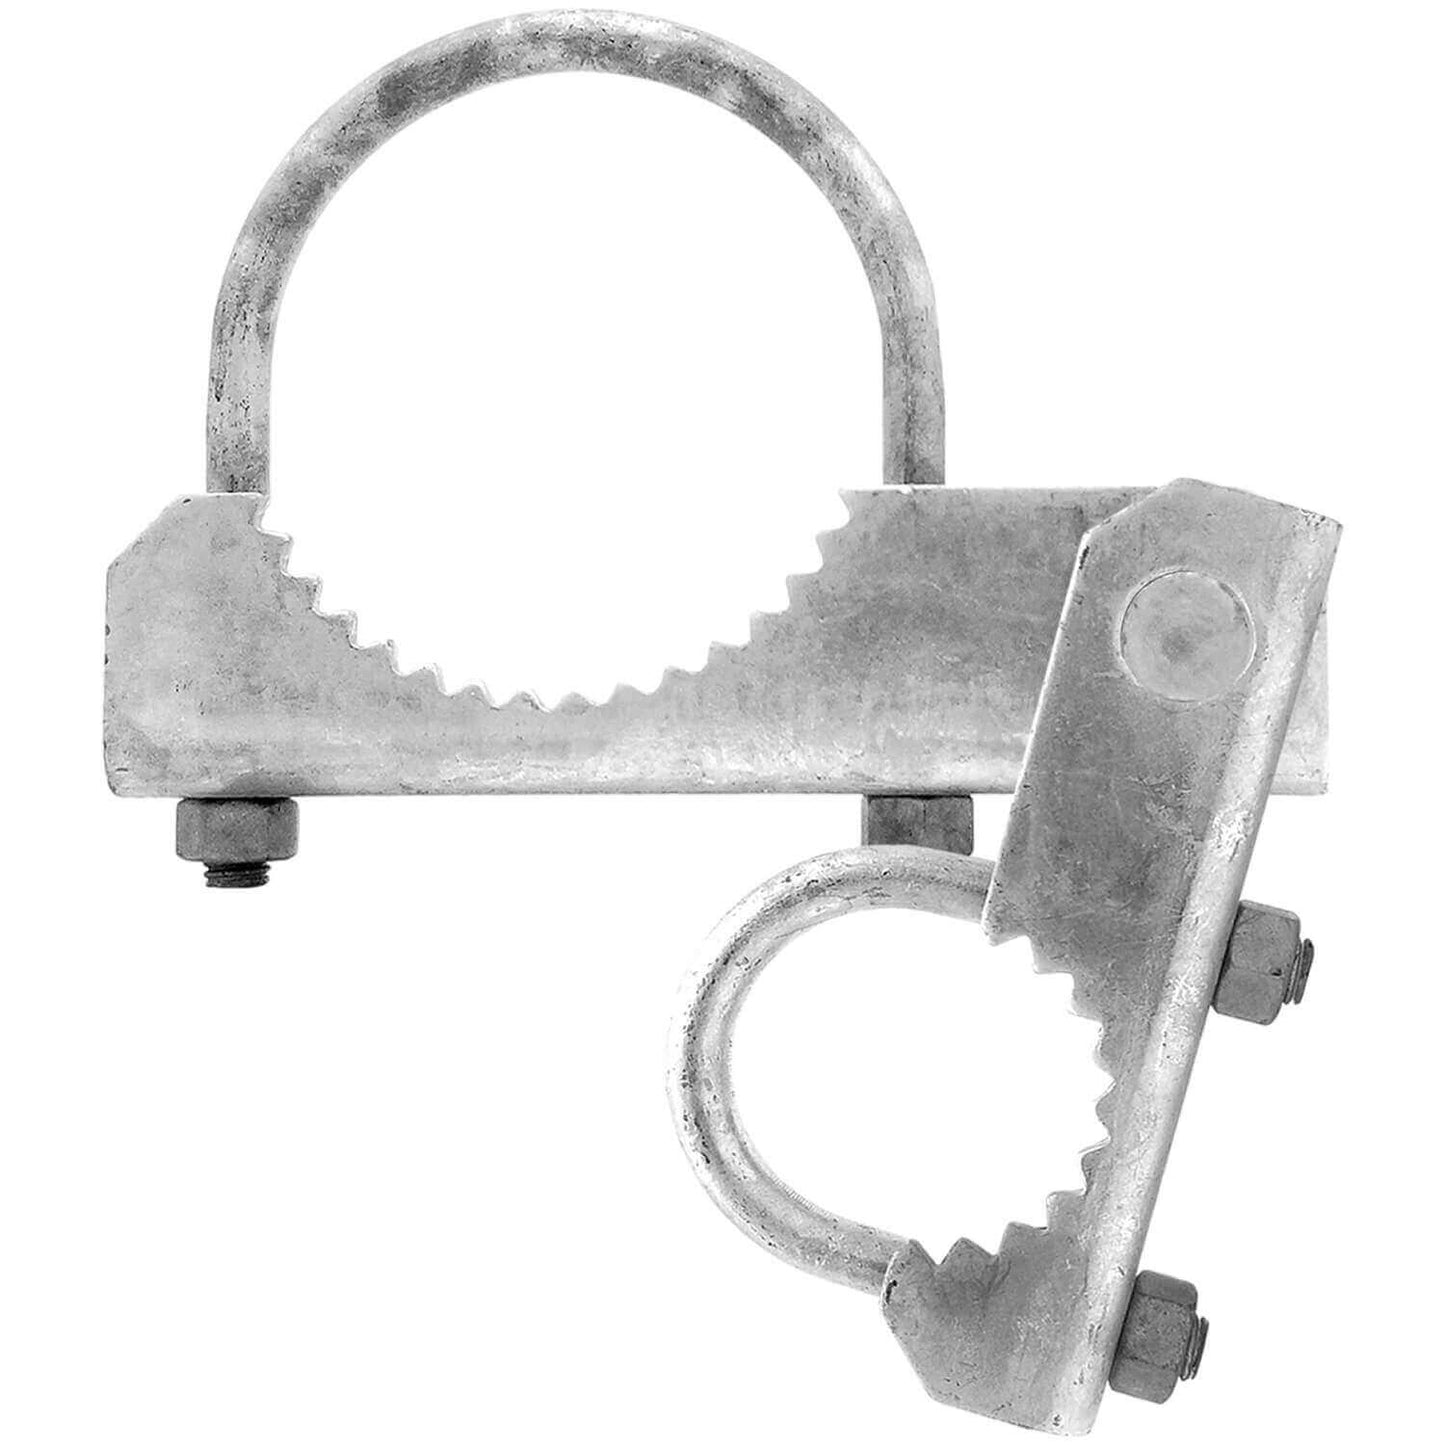 Chain Link Fence 180 Degree Commercial Duty Gate Hinge - Chain Link Post Gate Hinge - Hinge "U" Bolts Included - 2 Hinge Assy.